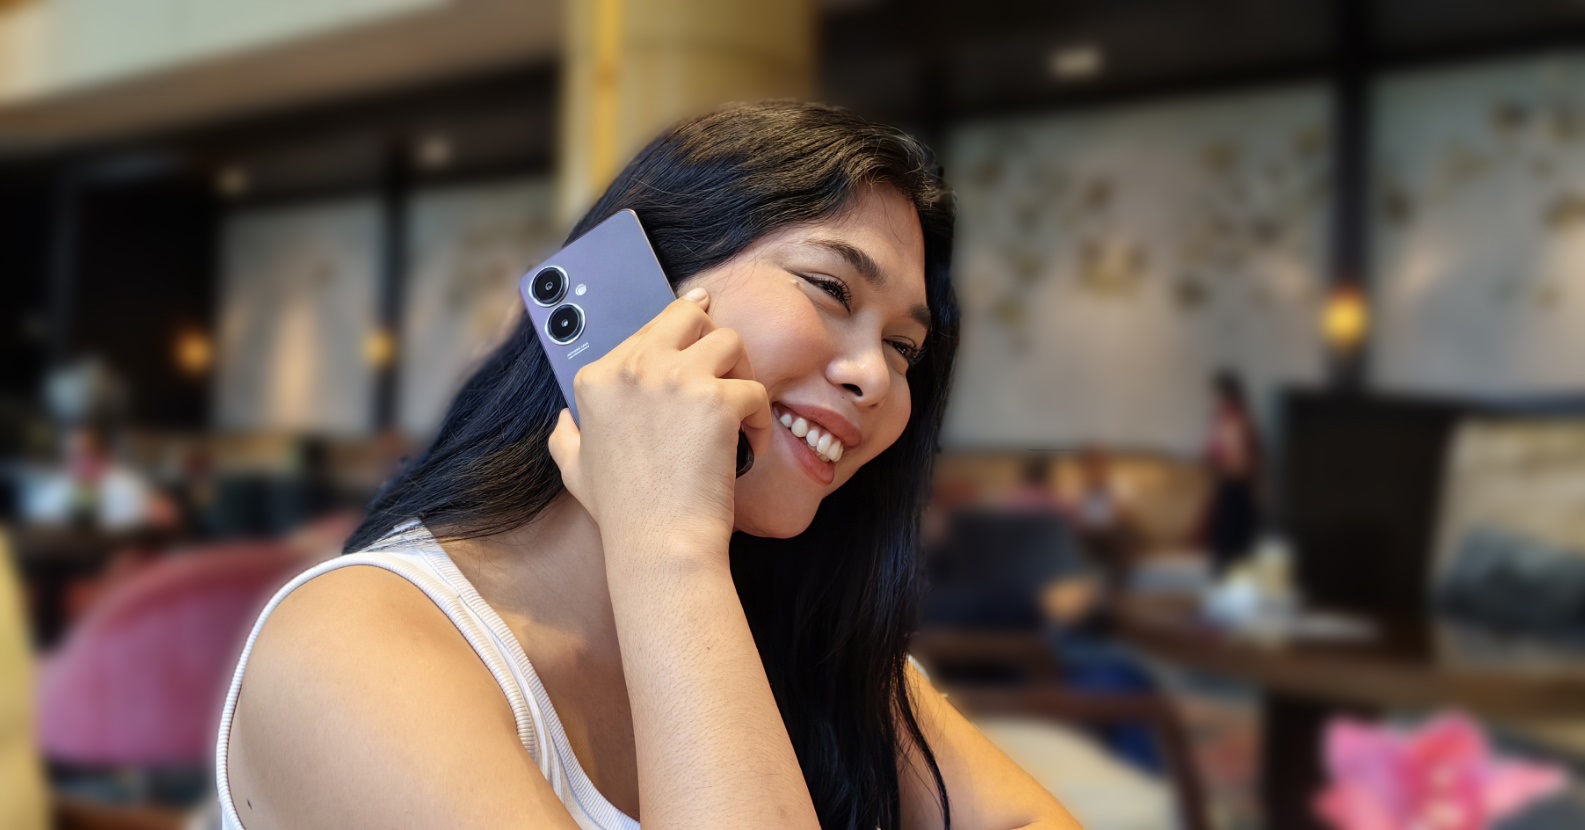 5 reasons Why vivo Y Series is Worth it as entry level phone for Gen Zs, Millennials